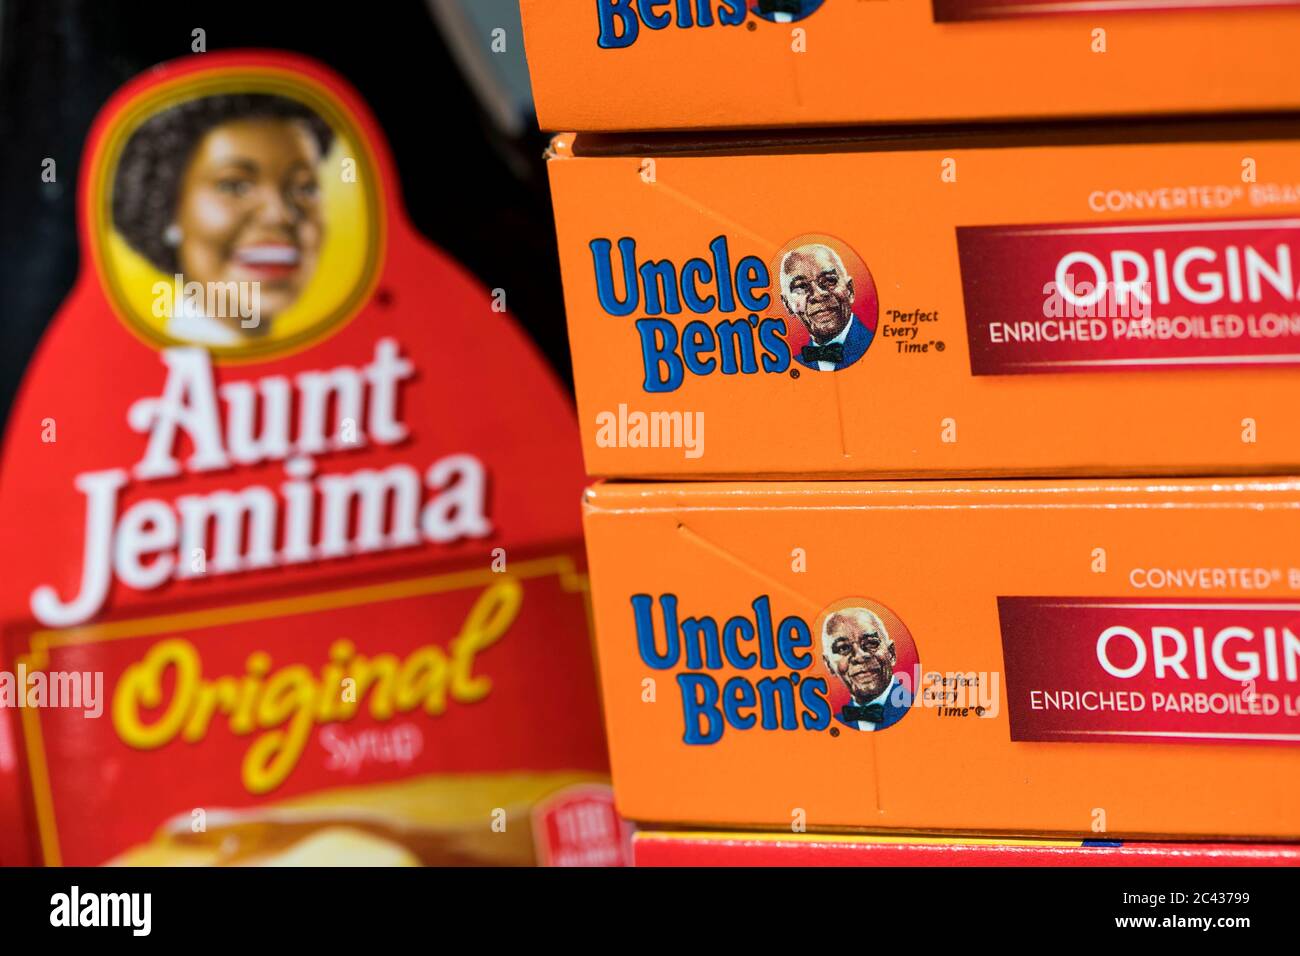 Bottles of Aunt Jemima syrup and Uncle Ben's rice products. Stock Photo